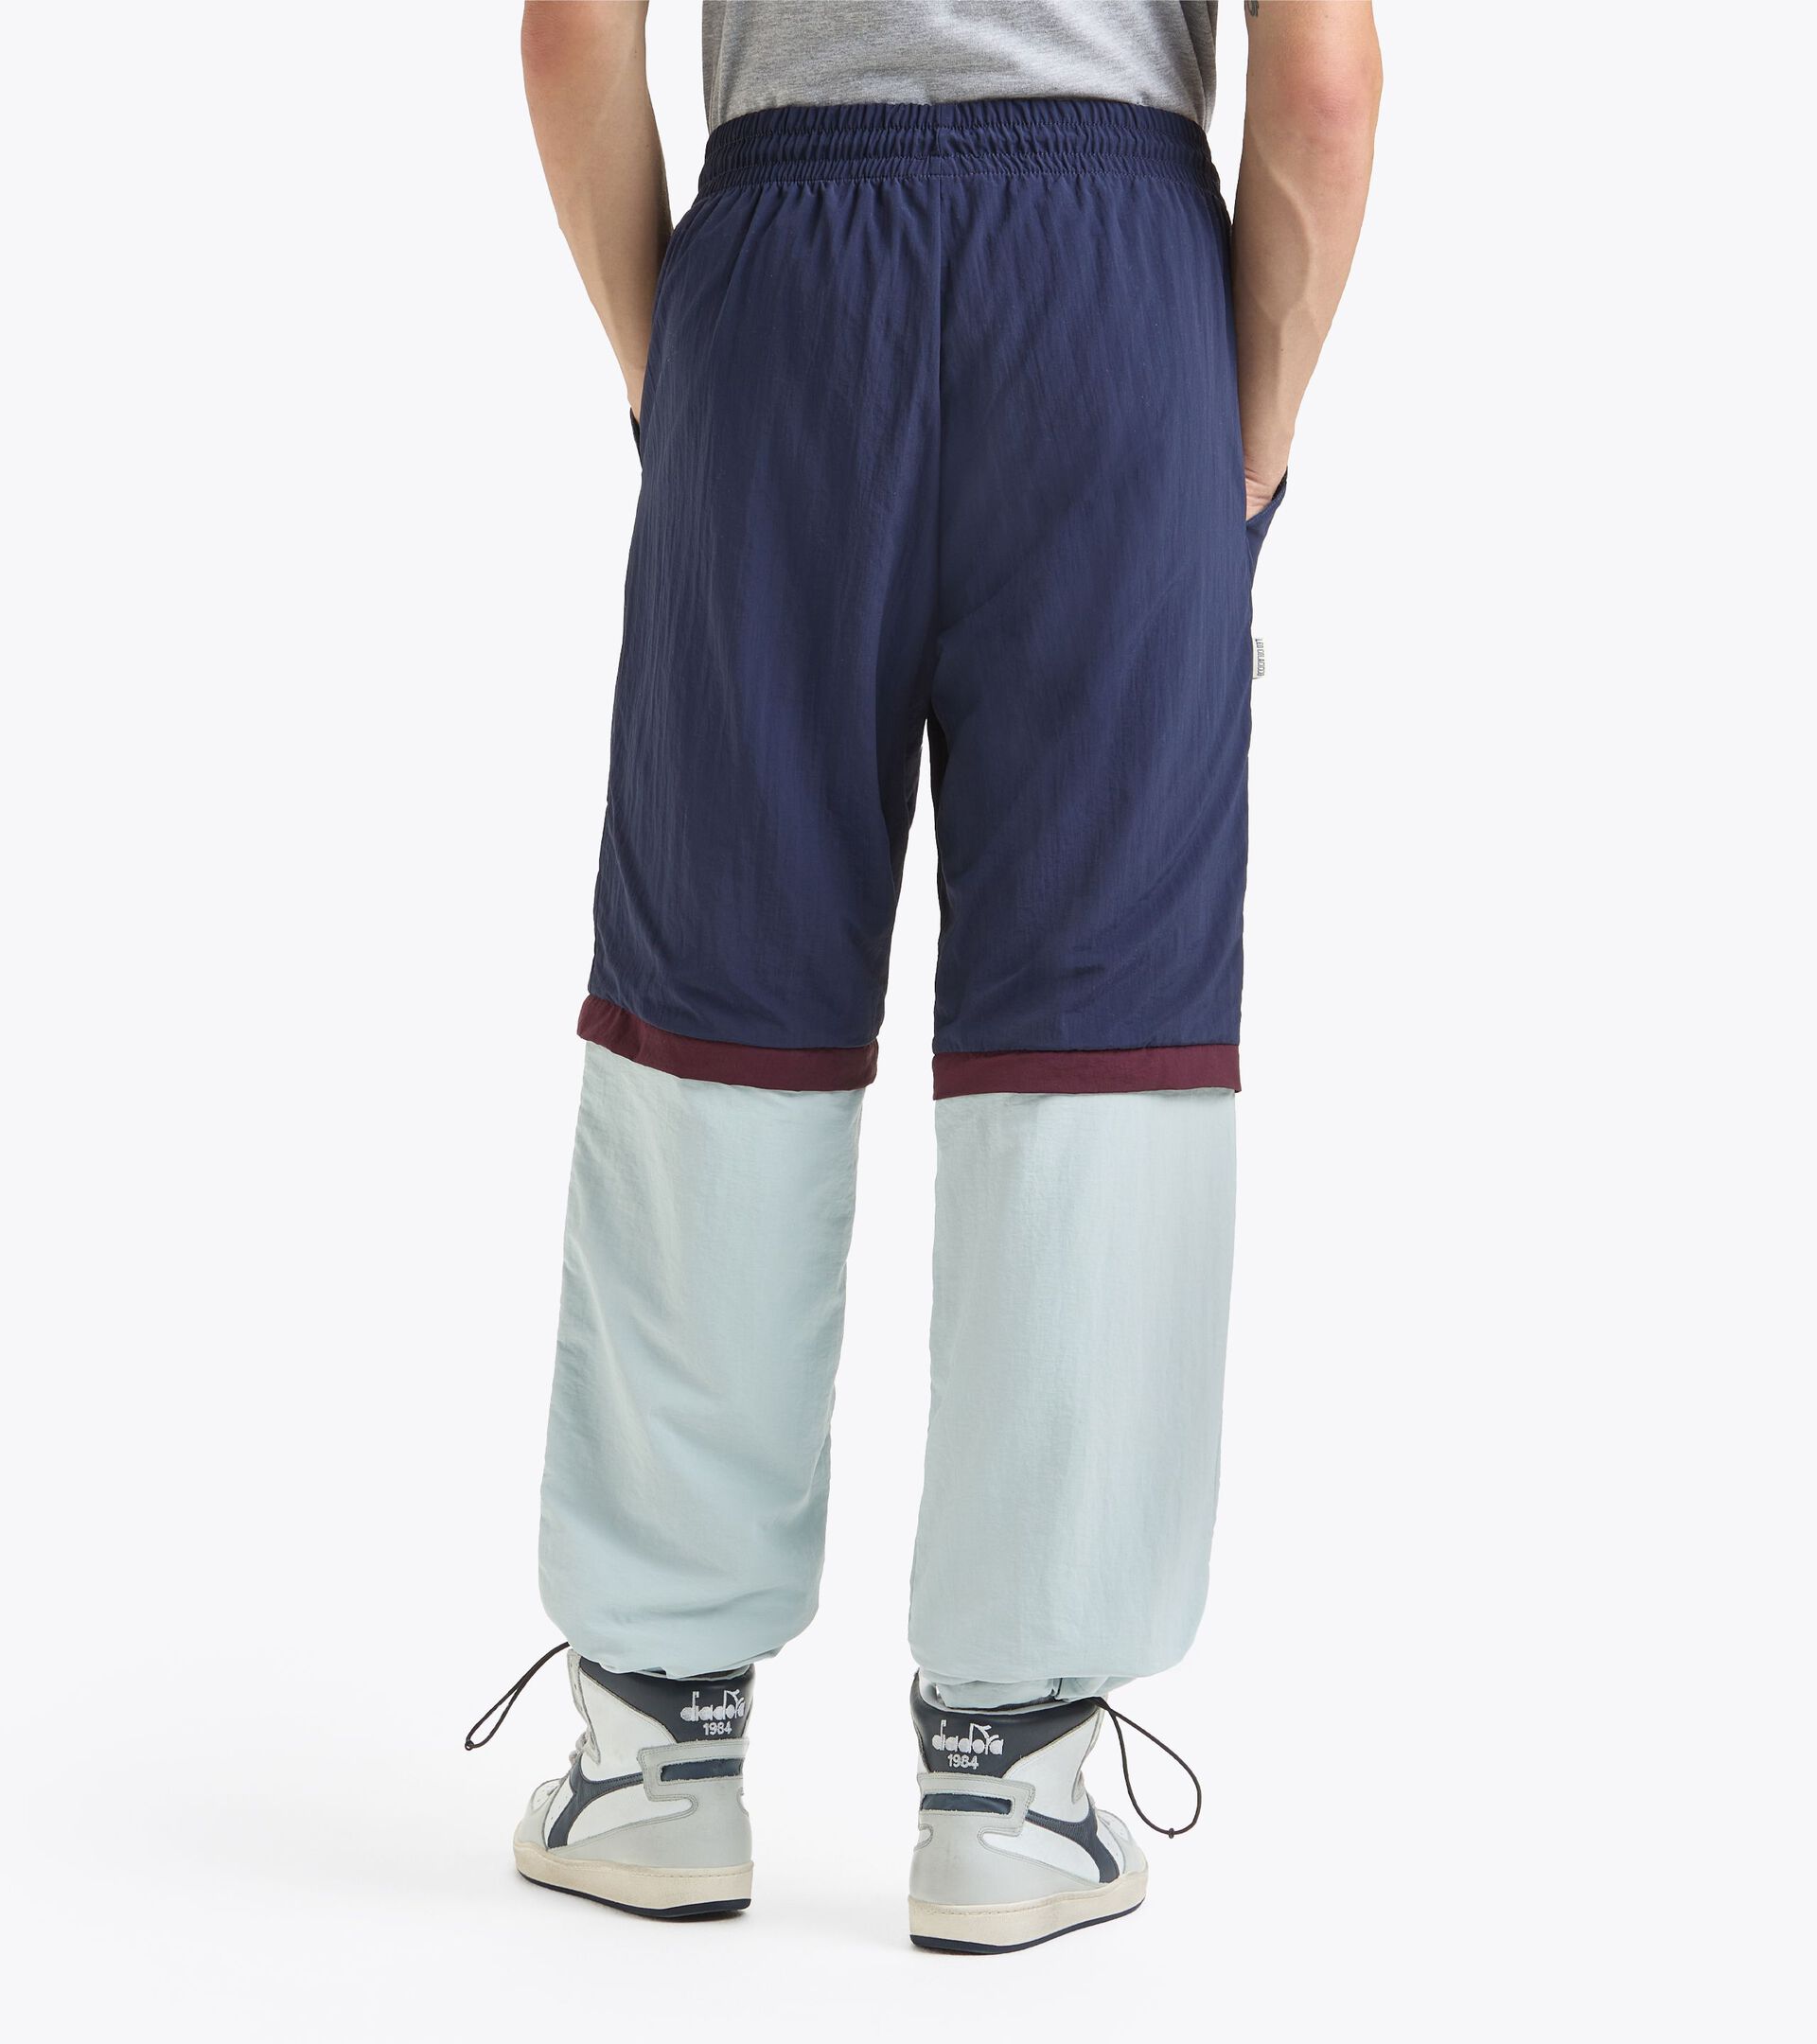 Track Pants - Made in italy - Gender Neutral TRACK PANT LEGACY OCEANA/HIGH RISE/MALAGA RED - Diadora